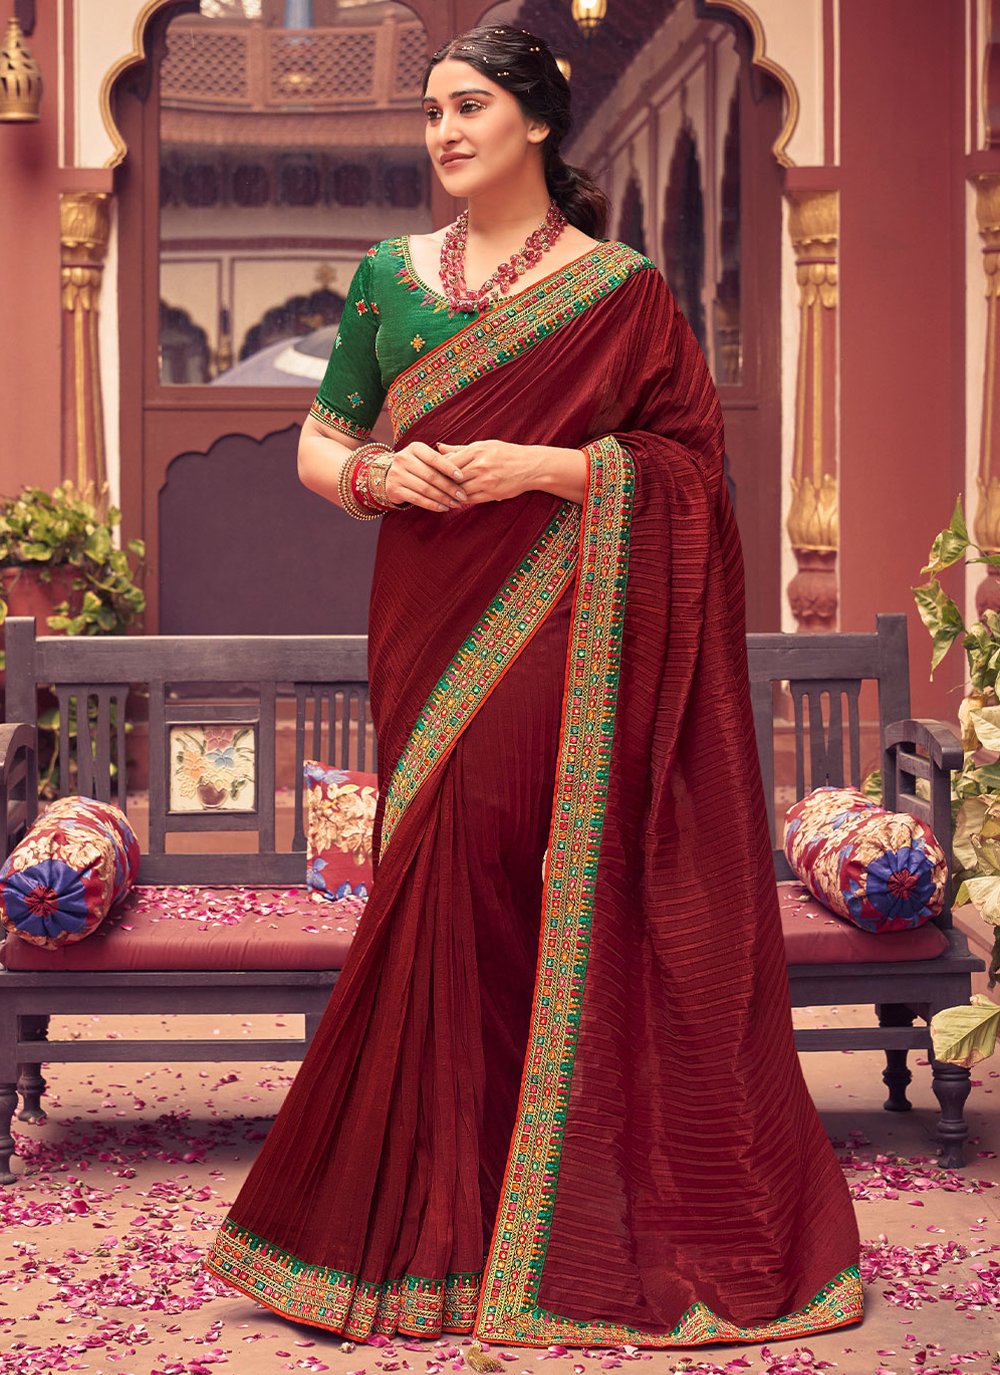 Maroon Cotton Handloom Saree with Contrast Blouse - SGM18105